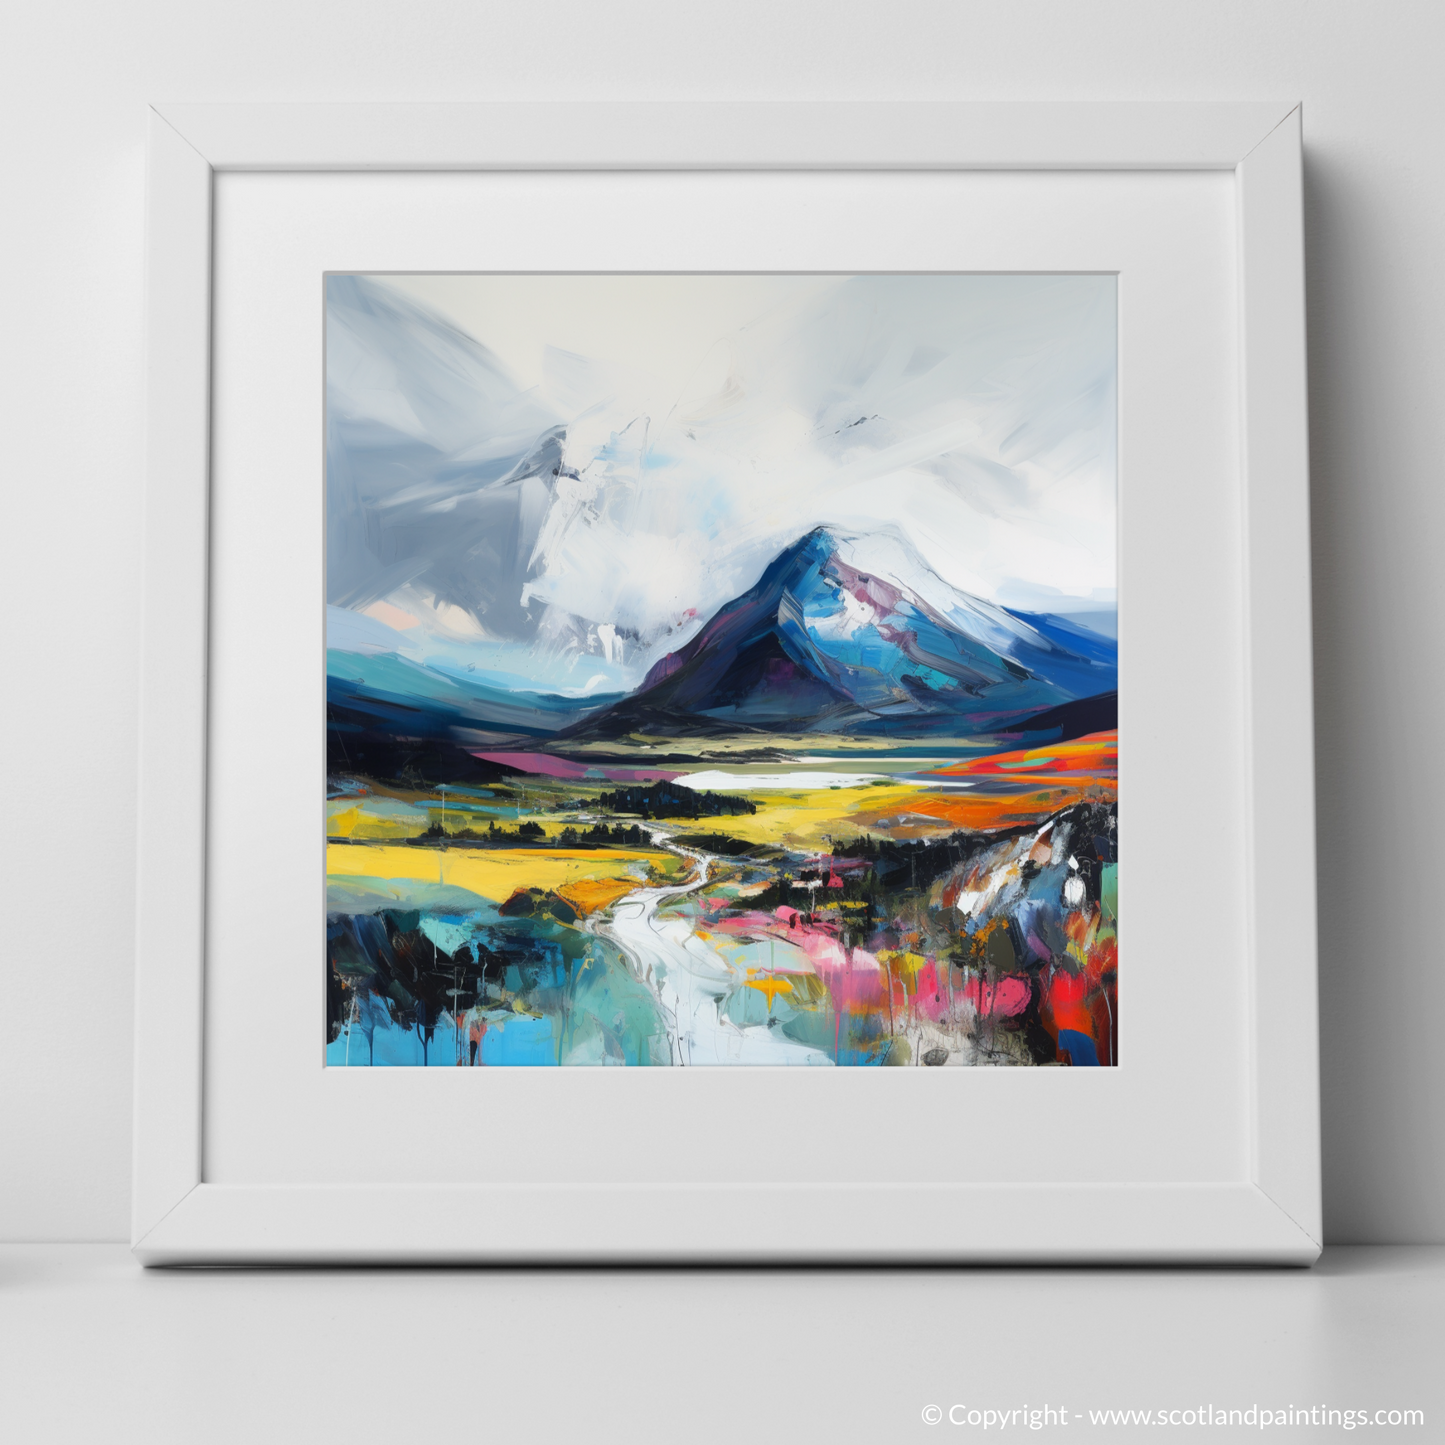 Art Print of Geal-chàrn (Drumochter) with a white frame